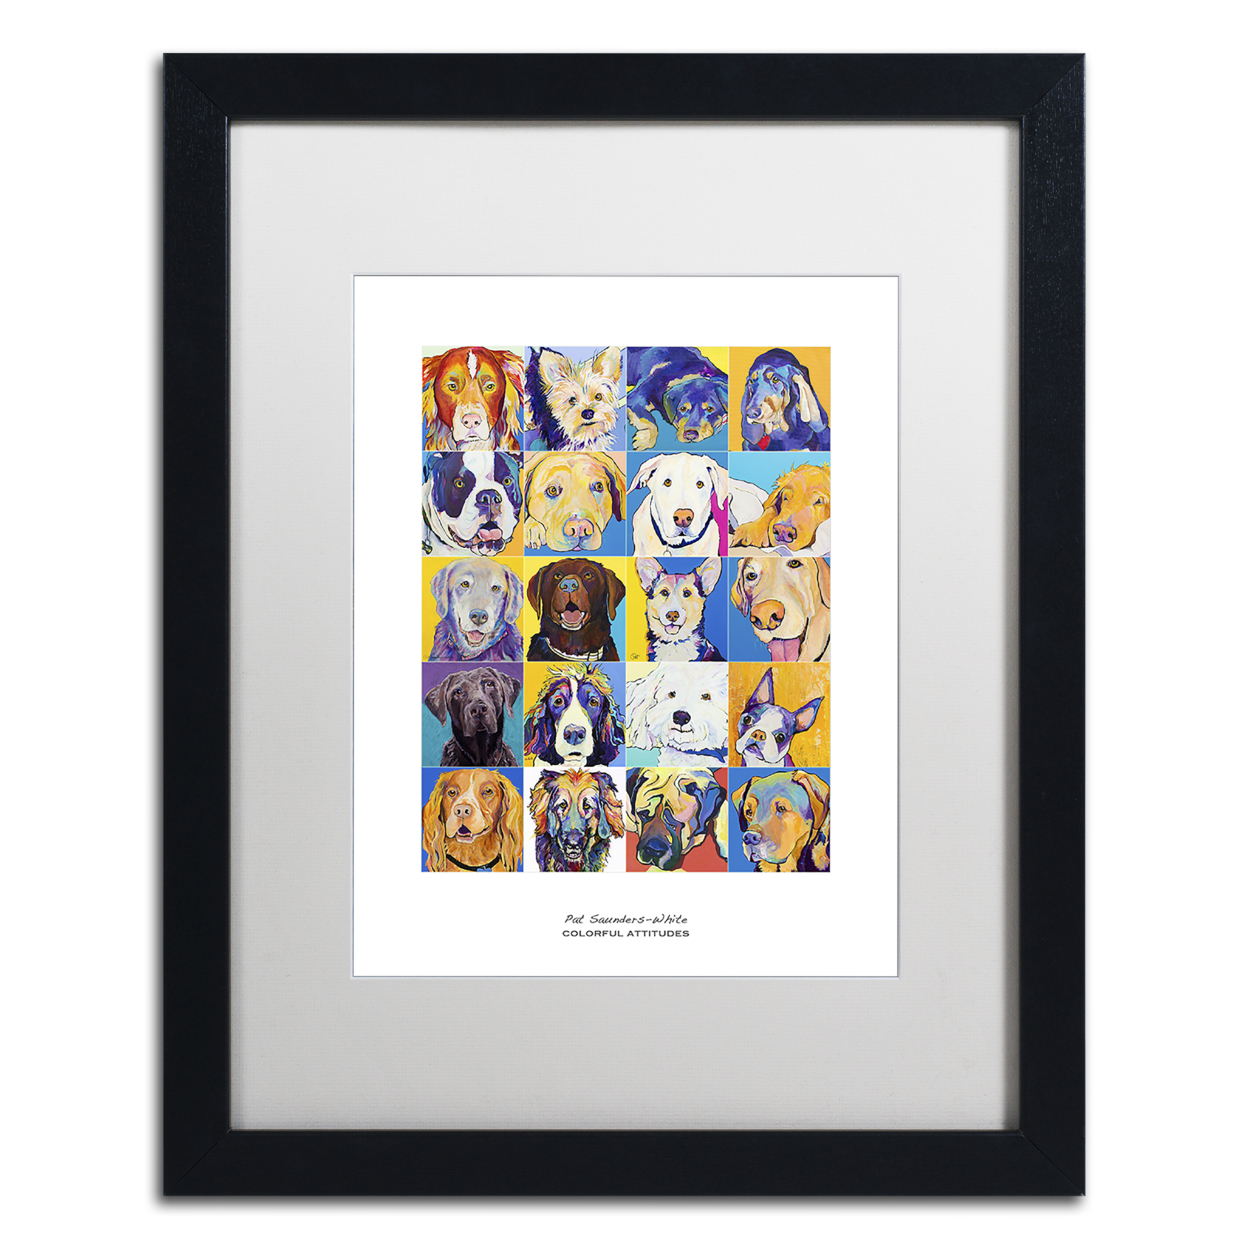 Pat Saunders-White 'Colorful Attitudes Poster' Black Wooden Framed Art 18 X 22 Inches